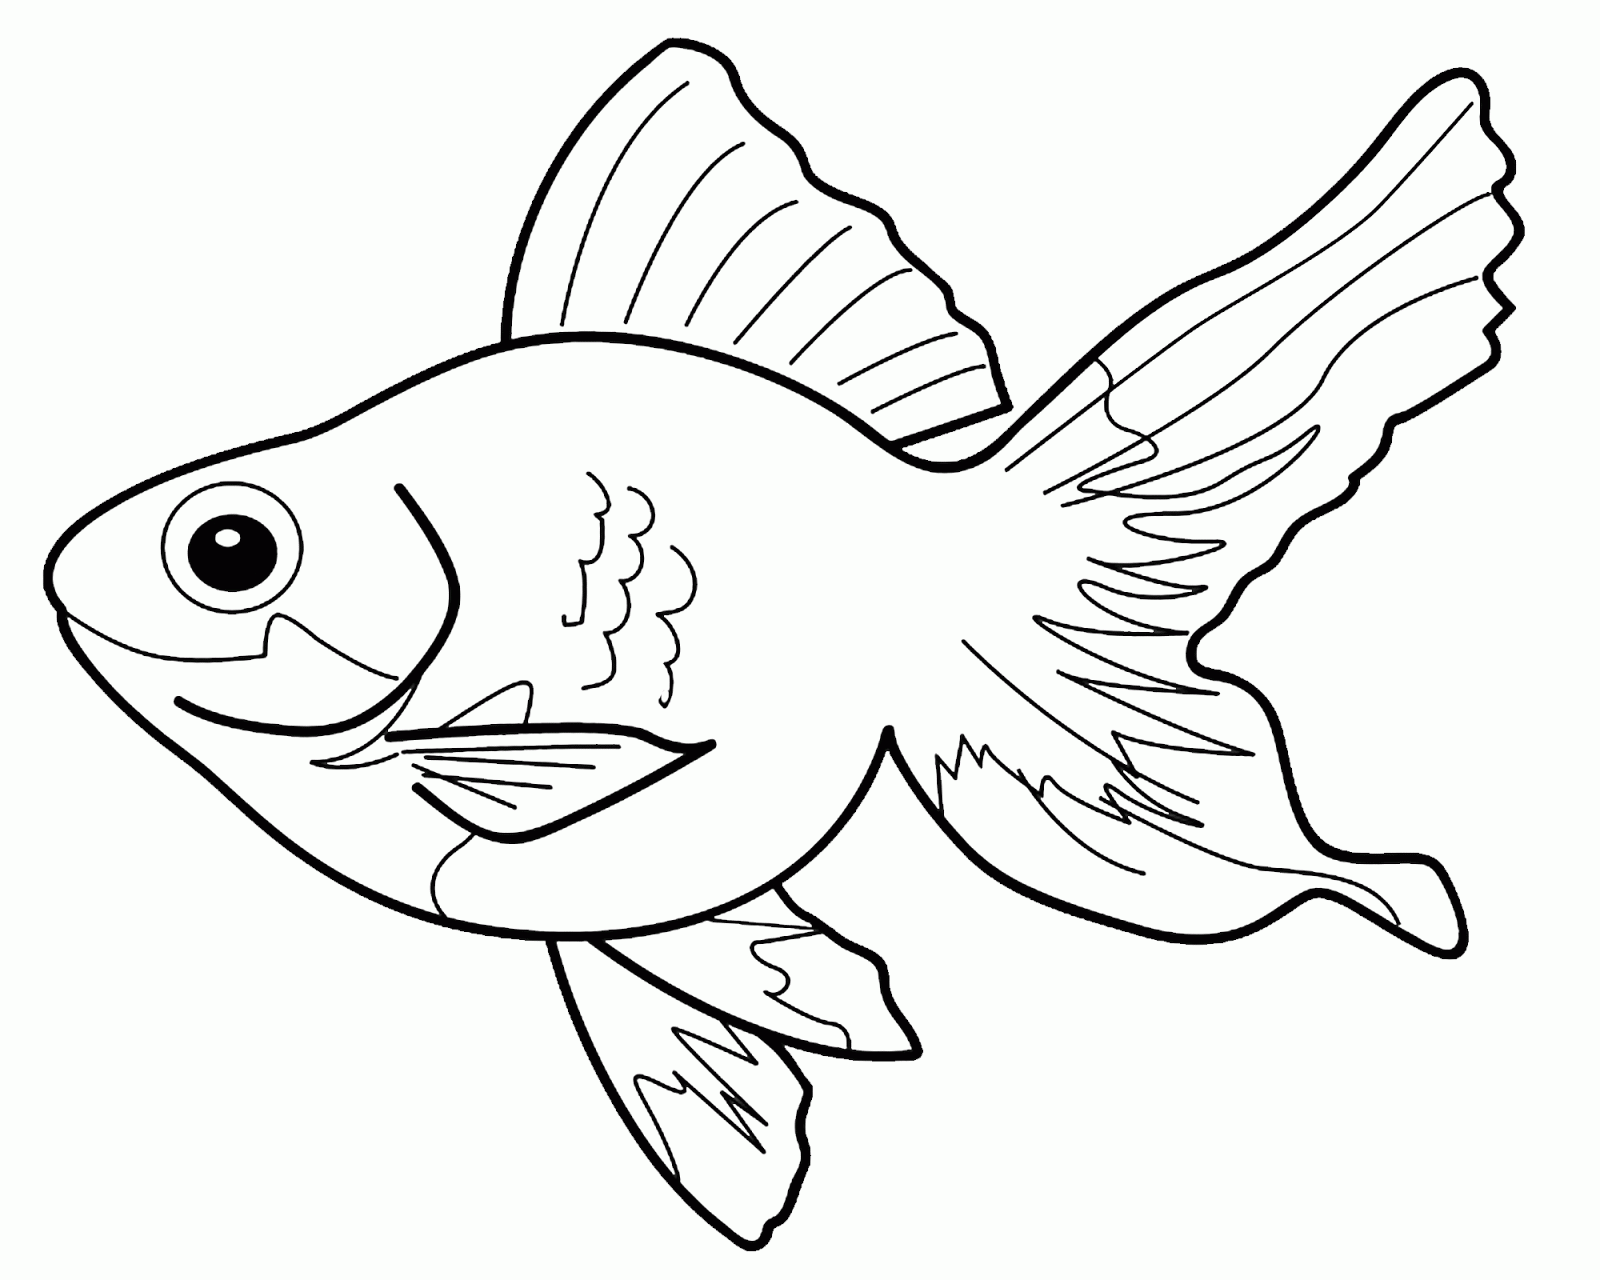 Fish Outline Coloring Pages animal fish for children Printable Coloring4free